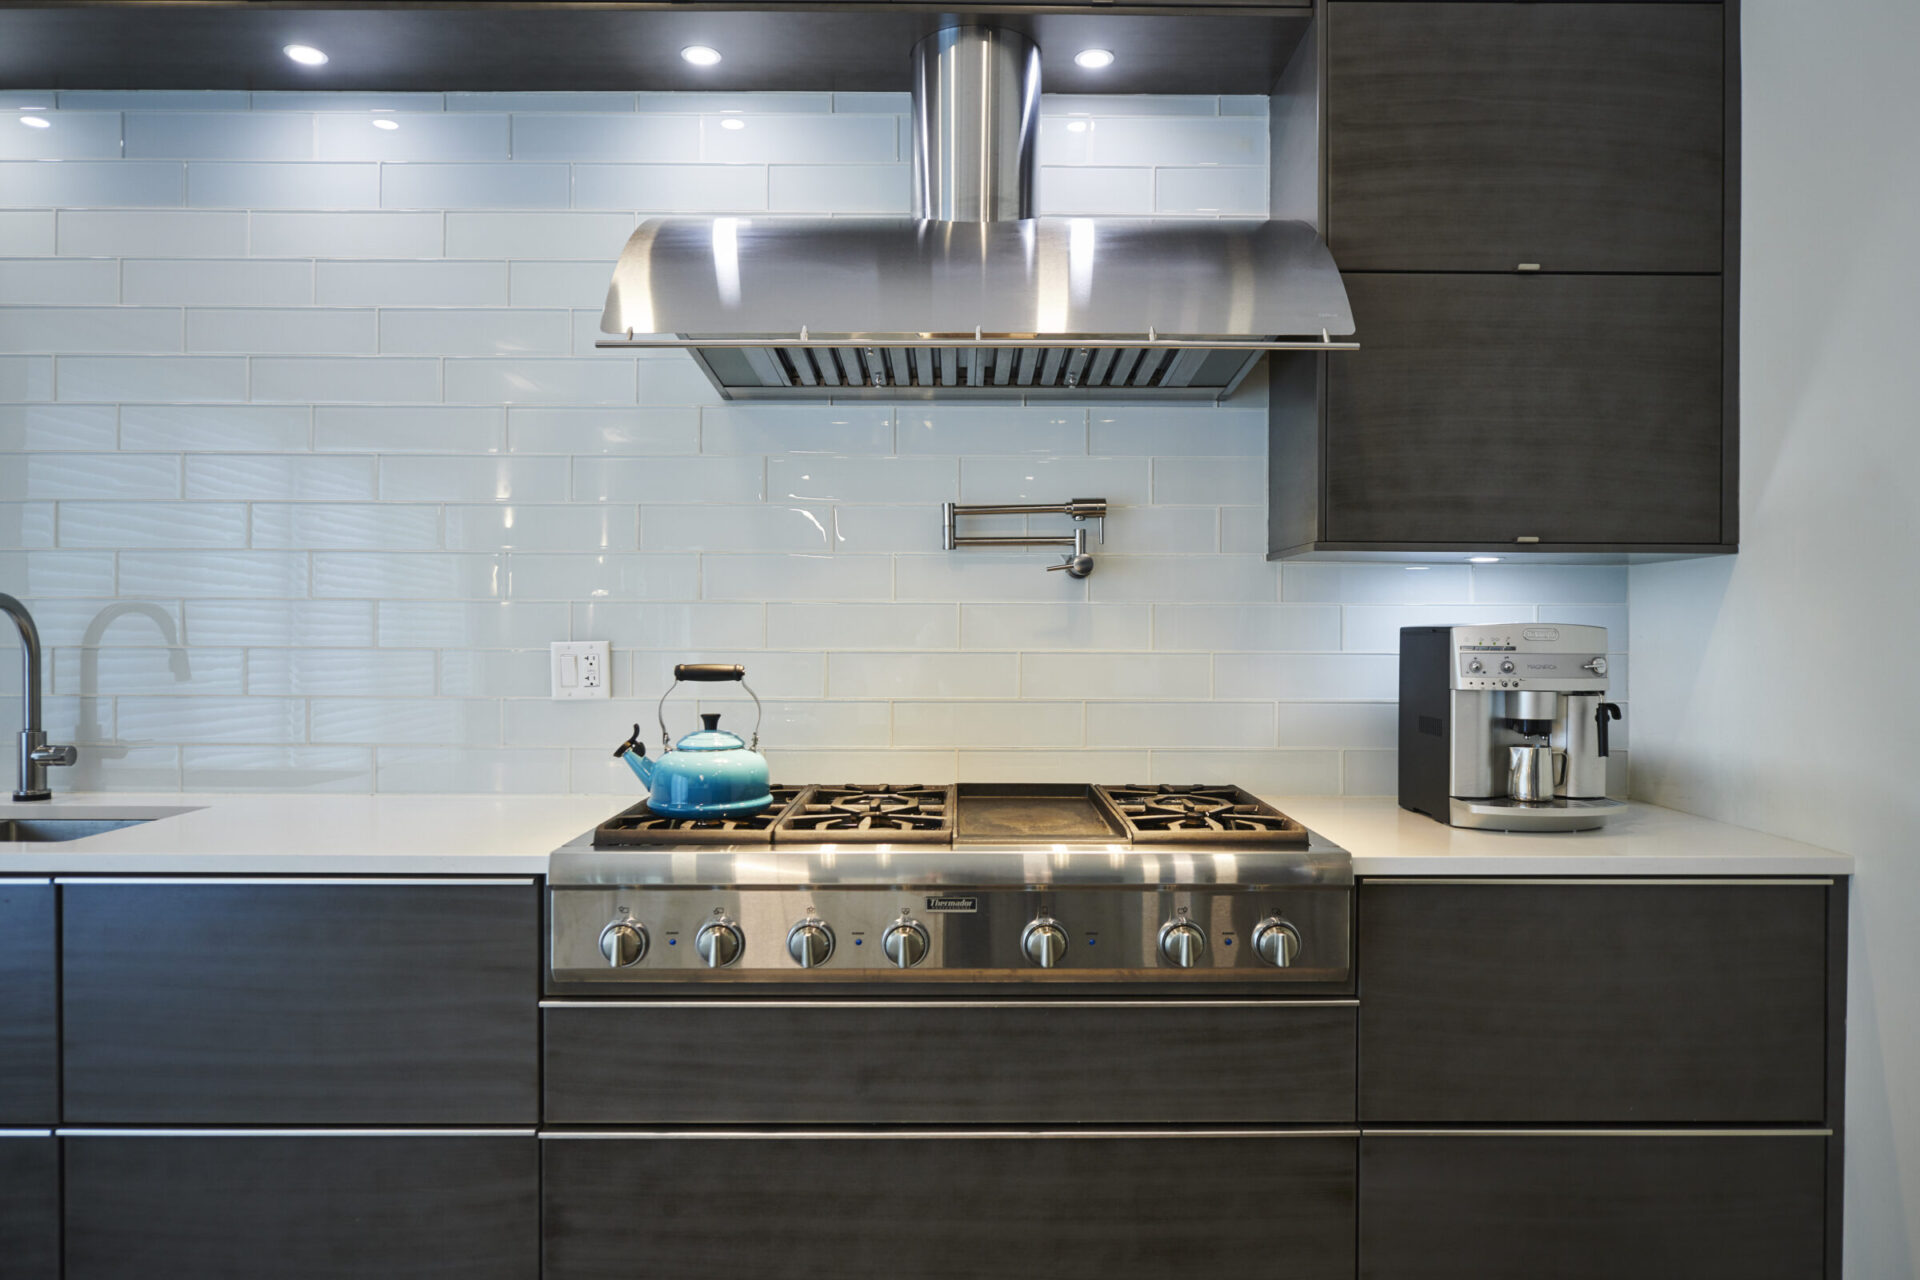 Modern kitchen interior with stainless steel gas stove, blue kettle, large range hood, dark cabinetry, white countertops, and subway tile backsplash.